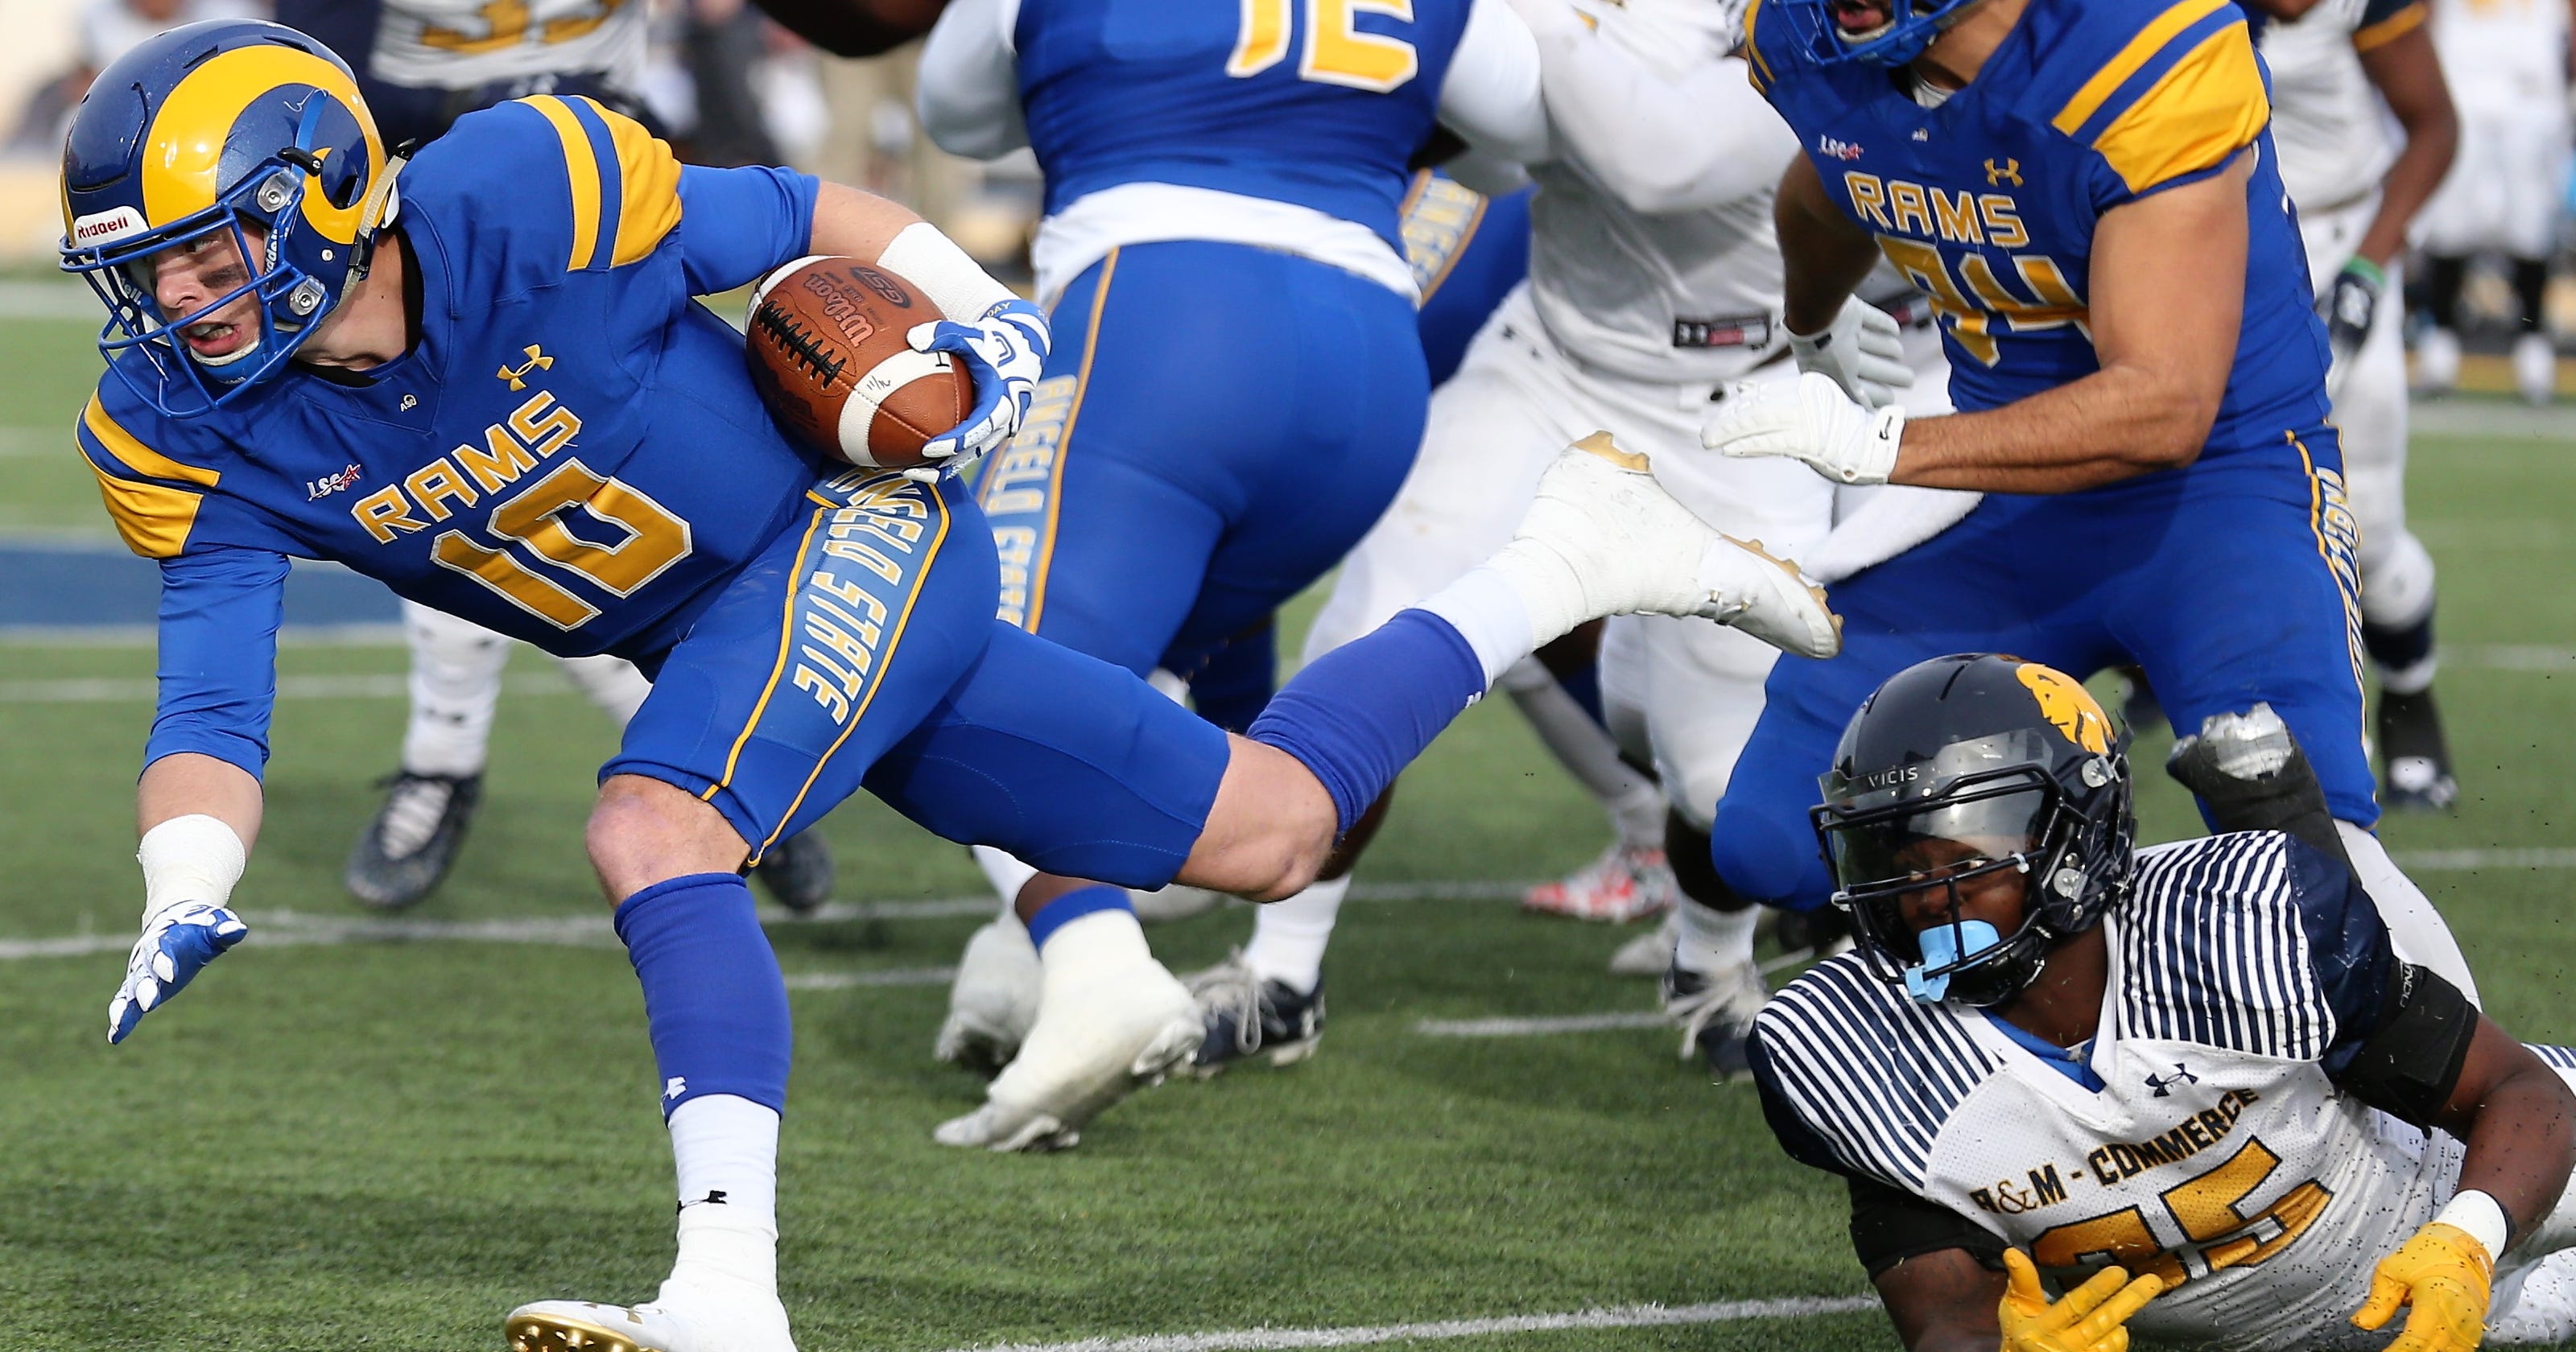 Angelo State football team's playoff hopes end in loss to Commerce